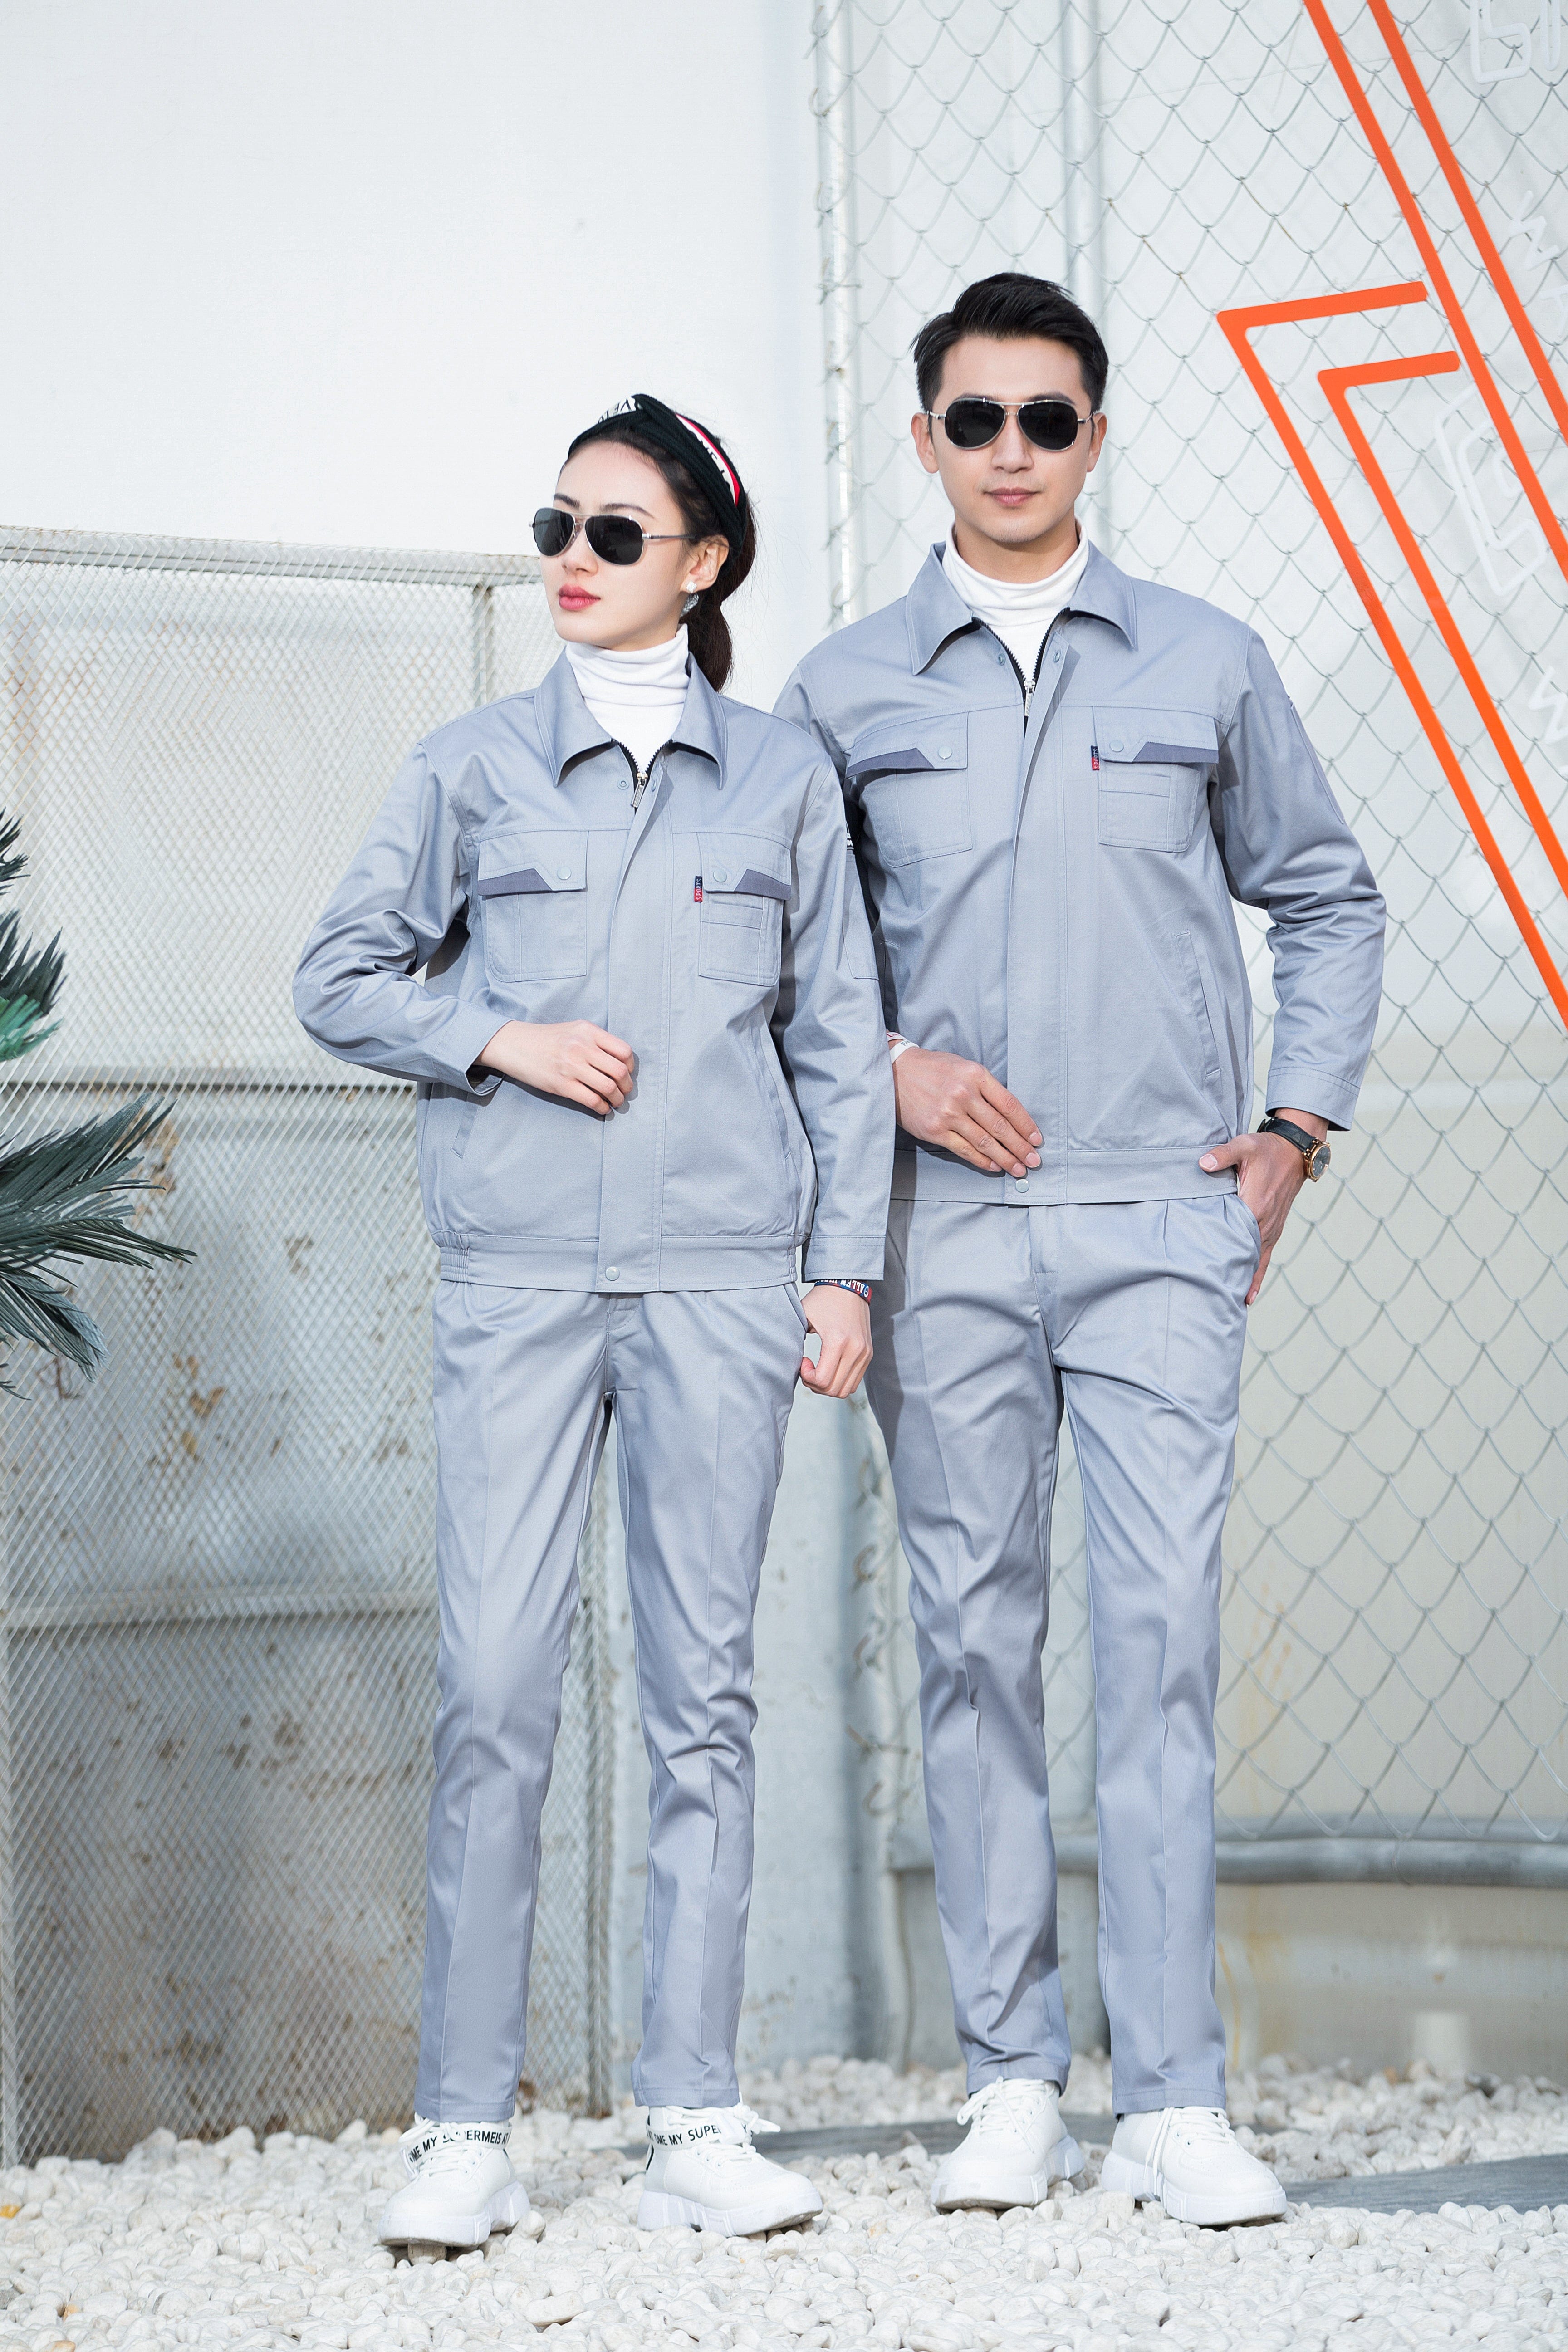 Corals Trading Co. 可樂思百貨商行 纯棉 Spring and Autumn style long-sleeved anti-static work clothes series SD-AS-W103